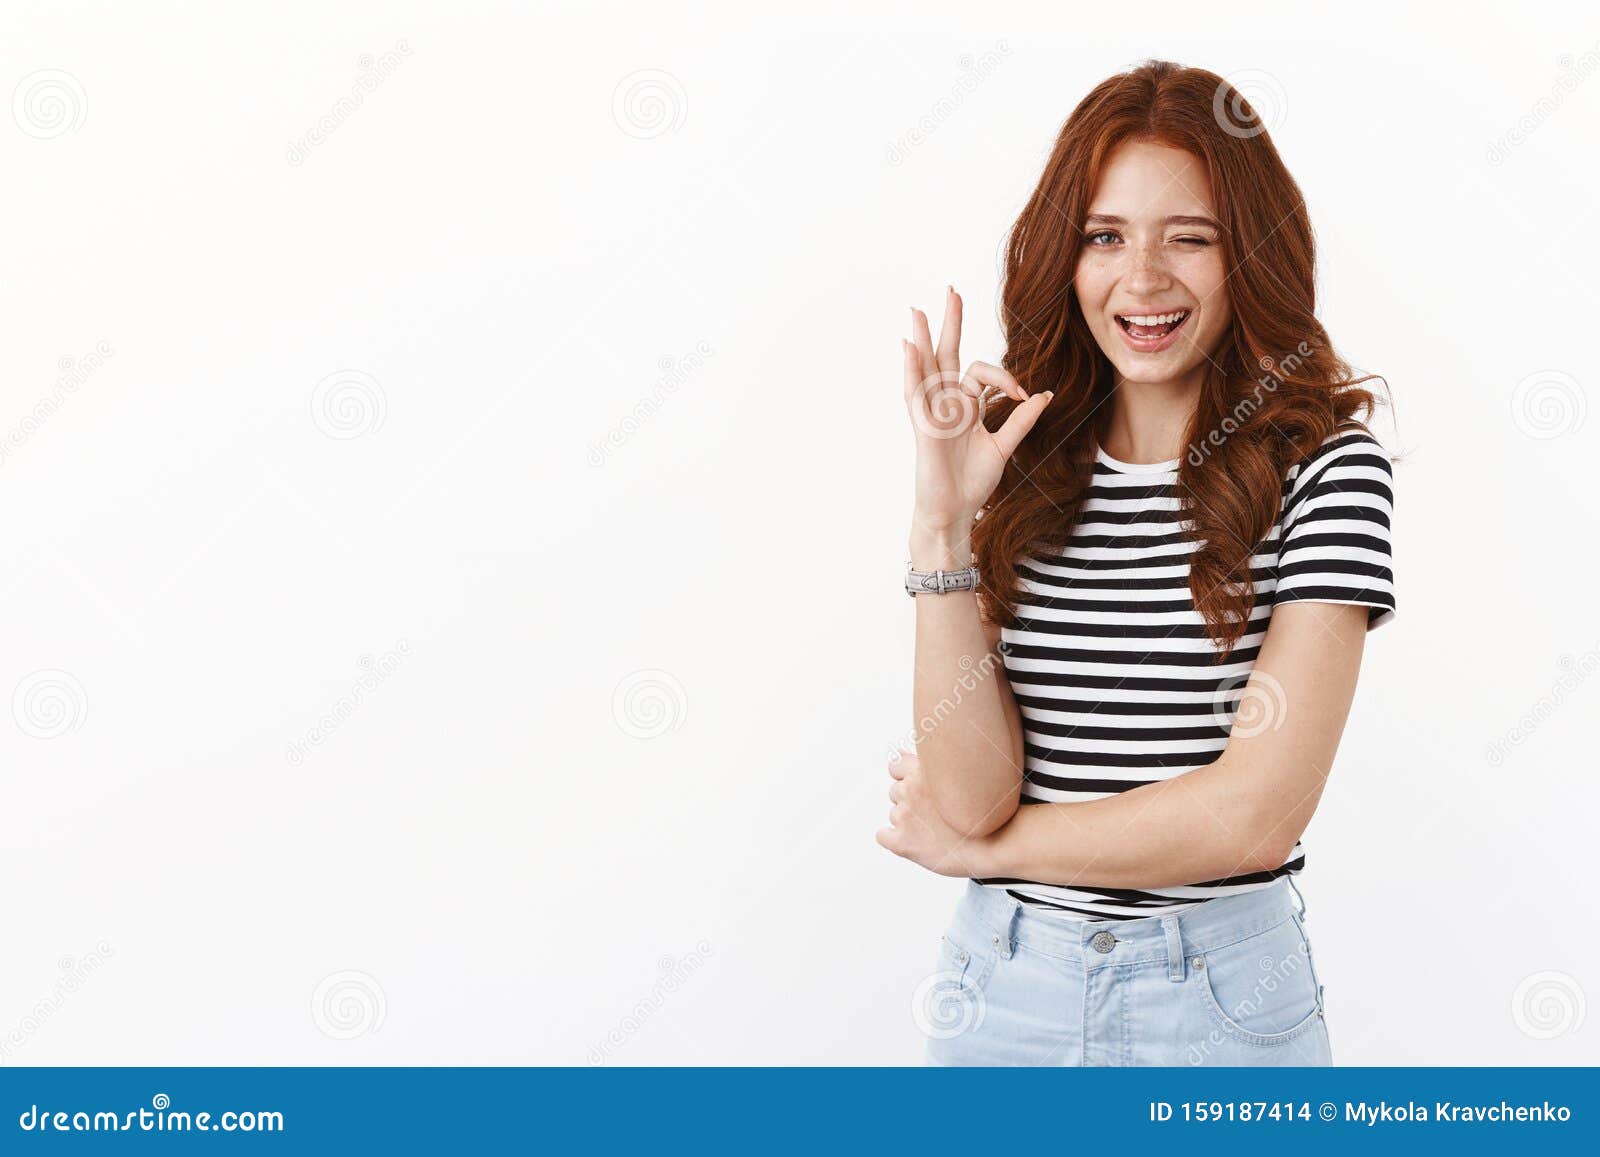 Cheeky Playful Redhead Female in Striped T-shirt Wink Suggestive, Showing  Okay Approval Sign, Smiling Have Hidden Stock Photo - Image of accept,  approval: 159187414